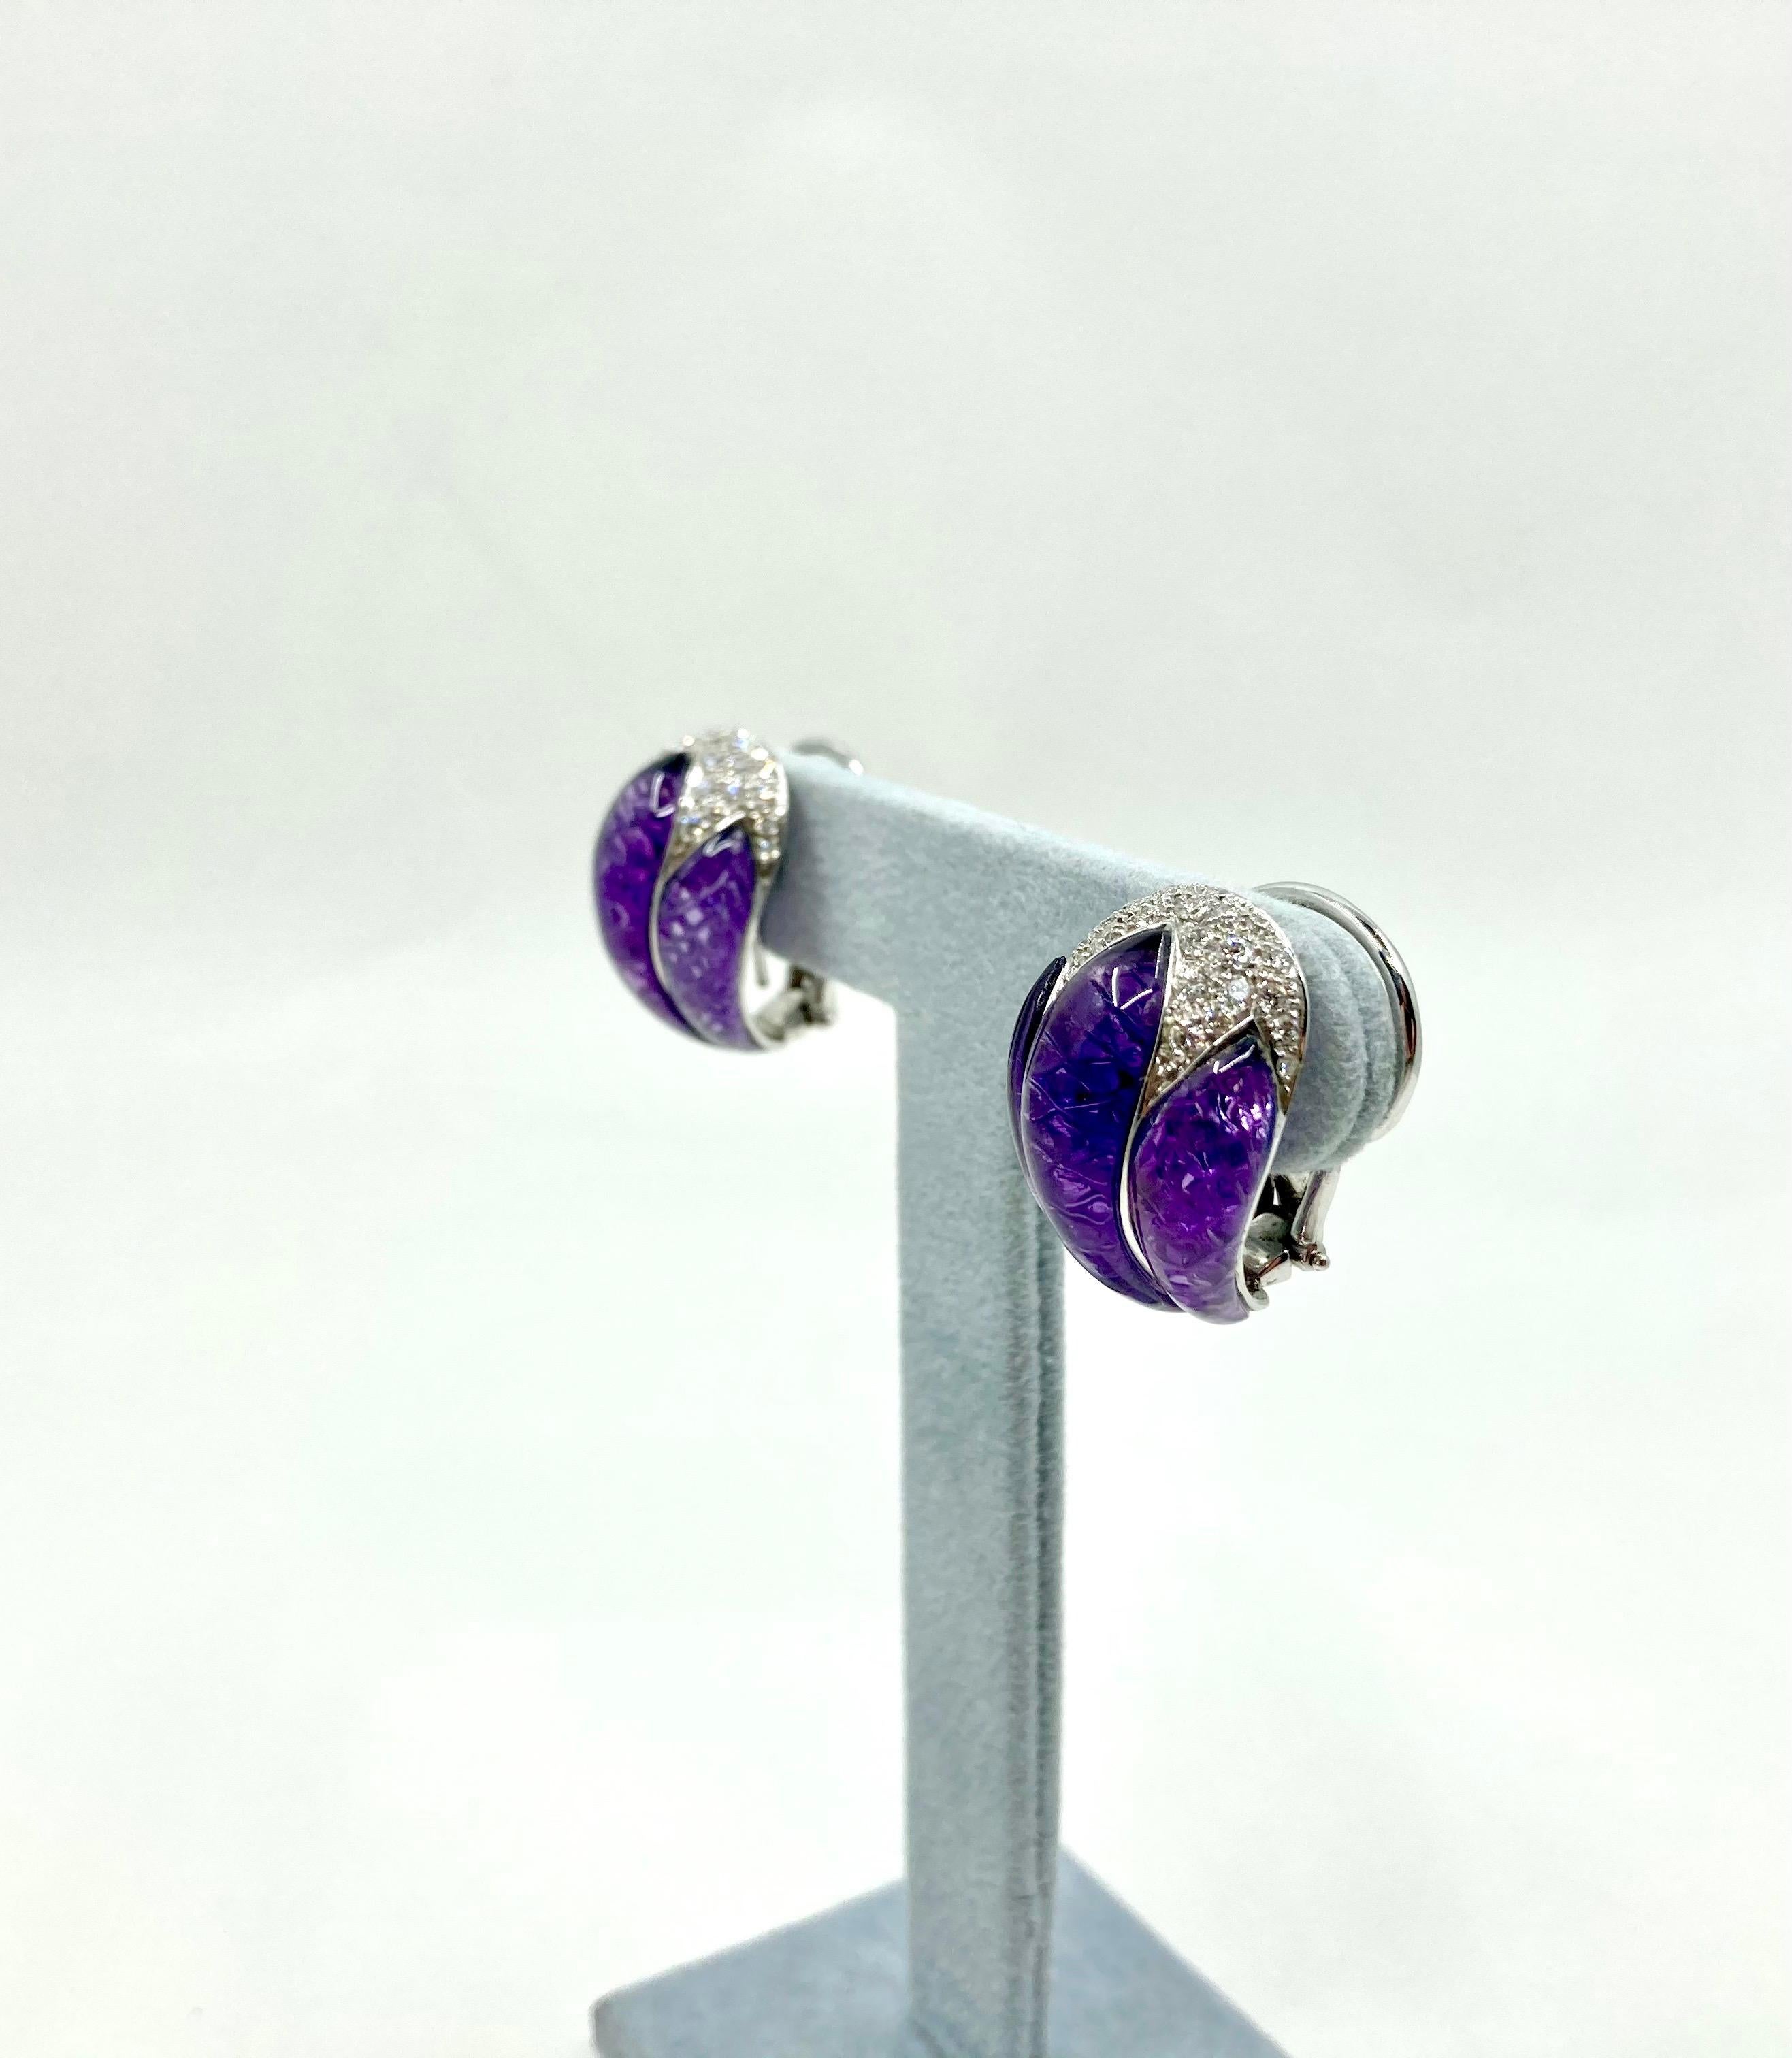 Timeless and elegant White Gold earrings, with Natural Carved Amethyst ct. 23.50 and White Diamonds ct. 0.99, Made in Italy by Roberto Casarin. 

A unique natural Amethysts mounted on a timeless and elegant design. Its intense yet delicate purple